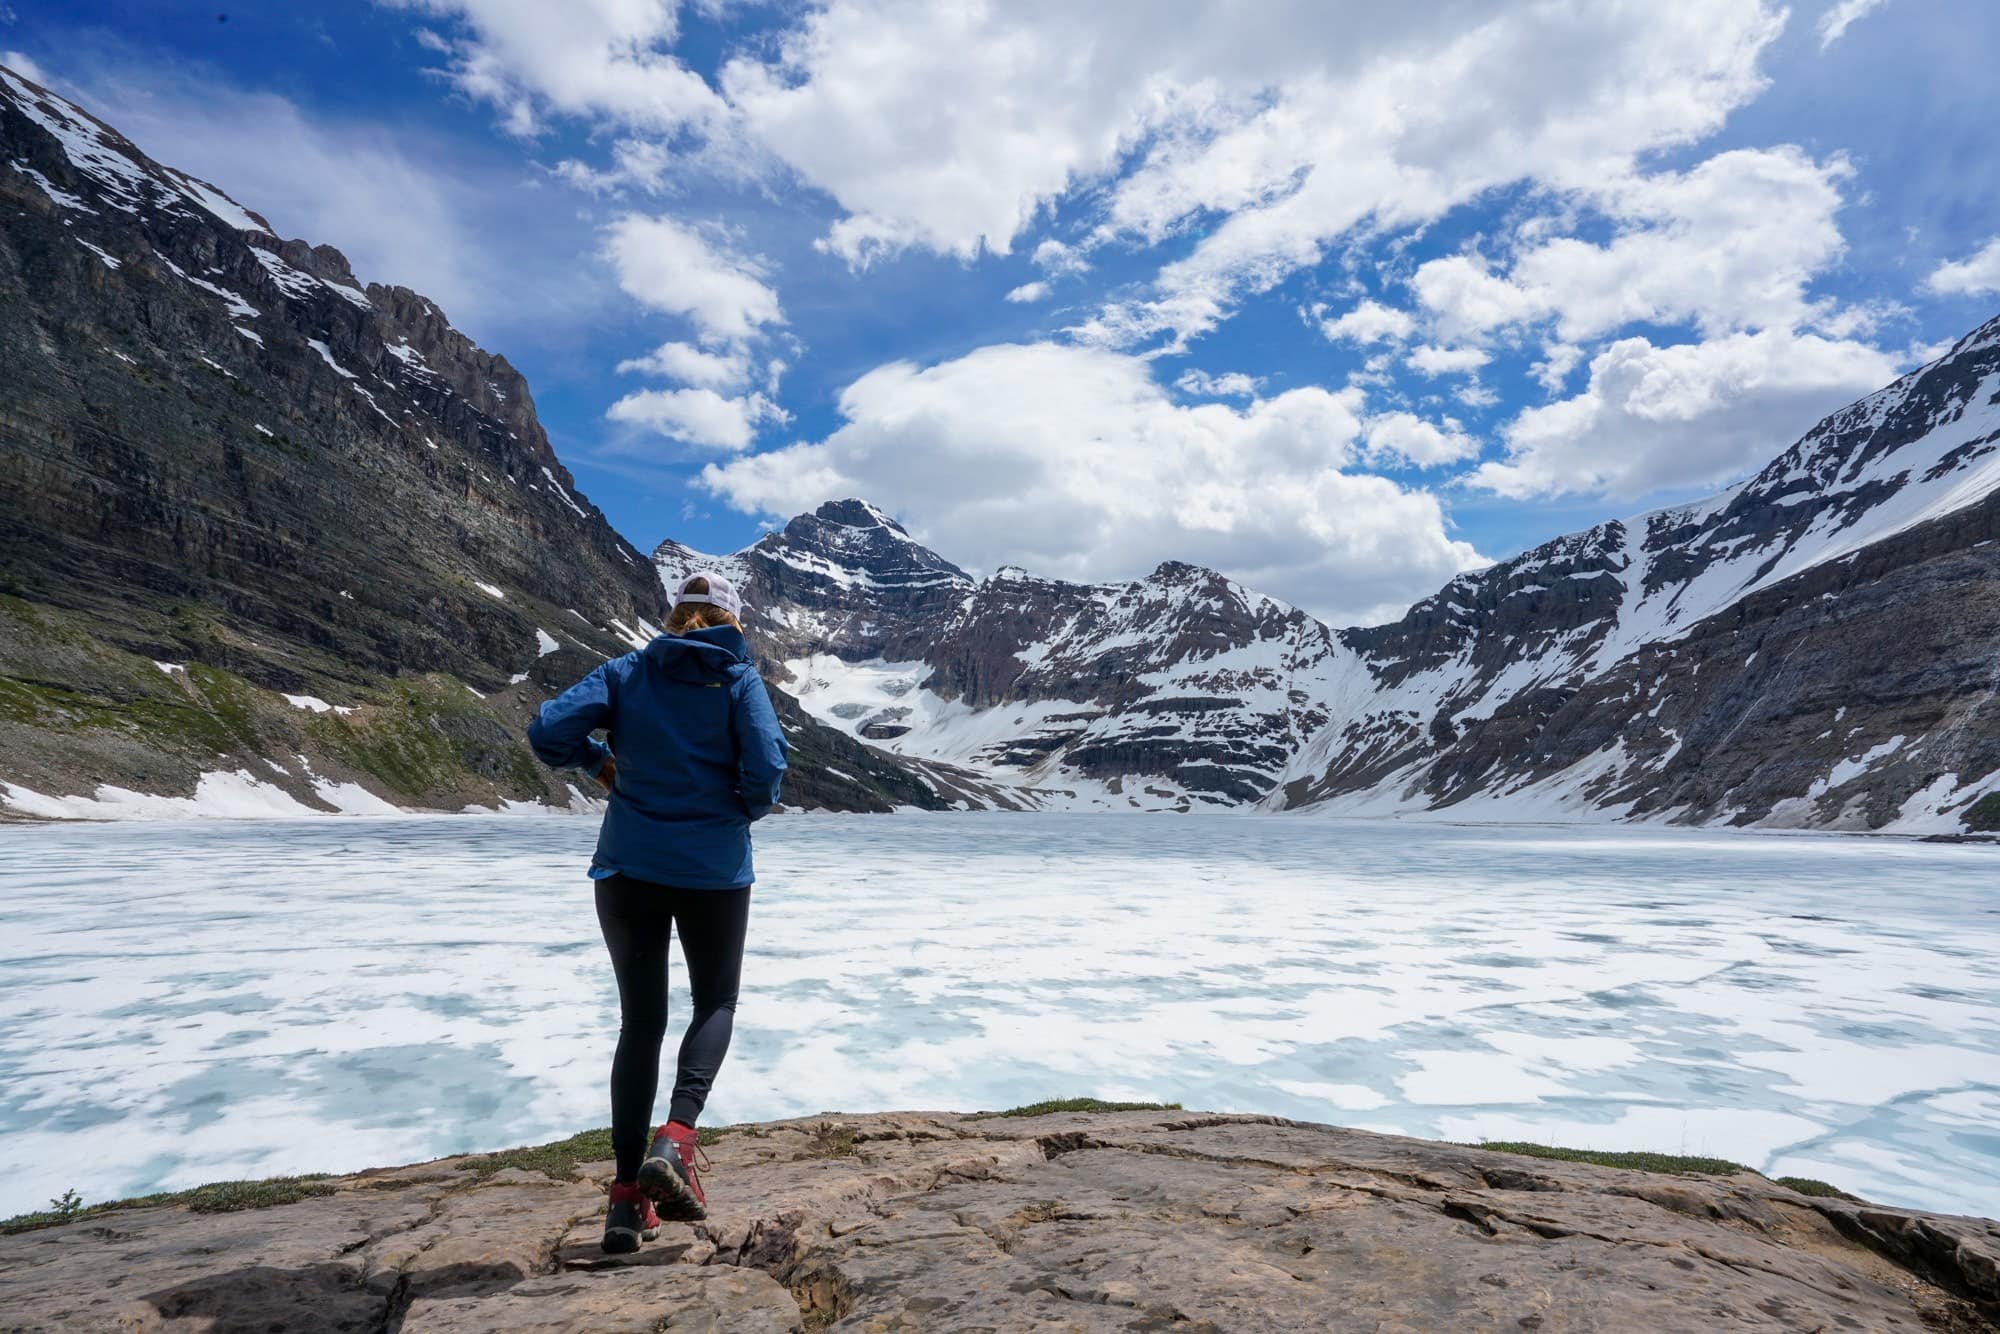 Hiker standing on flat rock in front of iced-over Lake McArthur in Yoho National Park, British Columbia. Snow covered peaks are in the background.